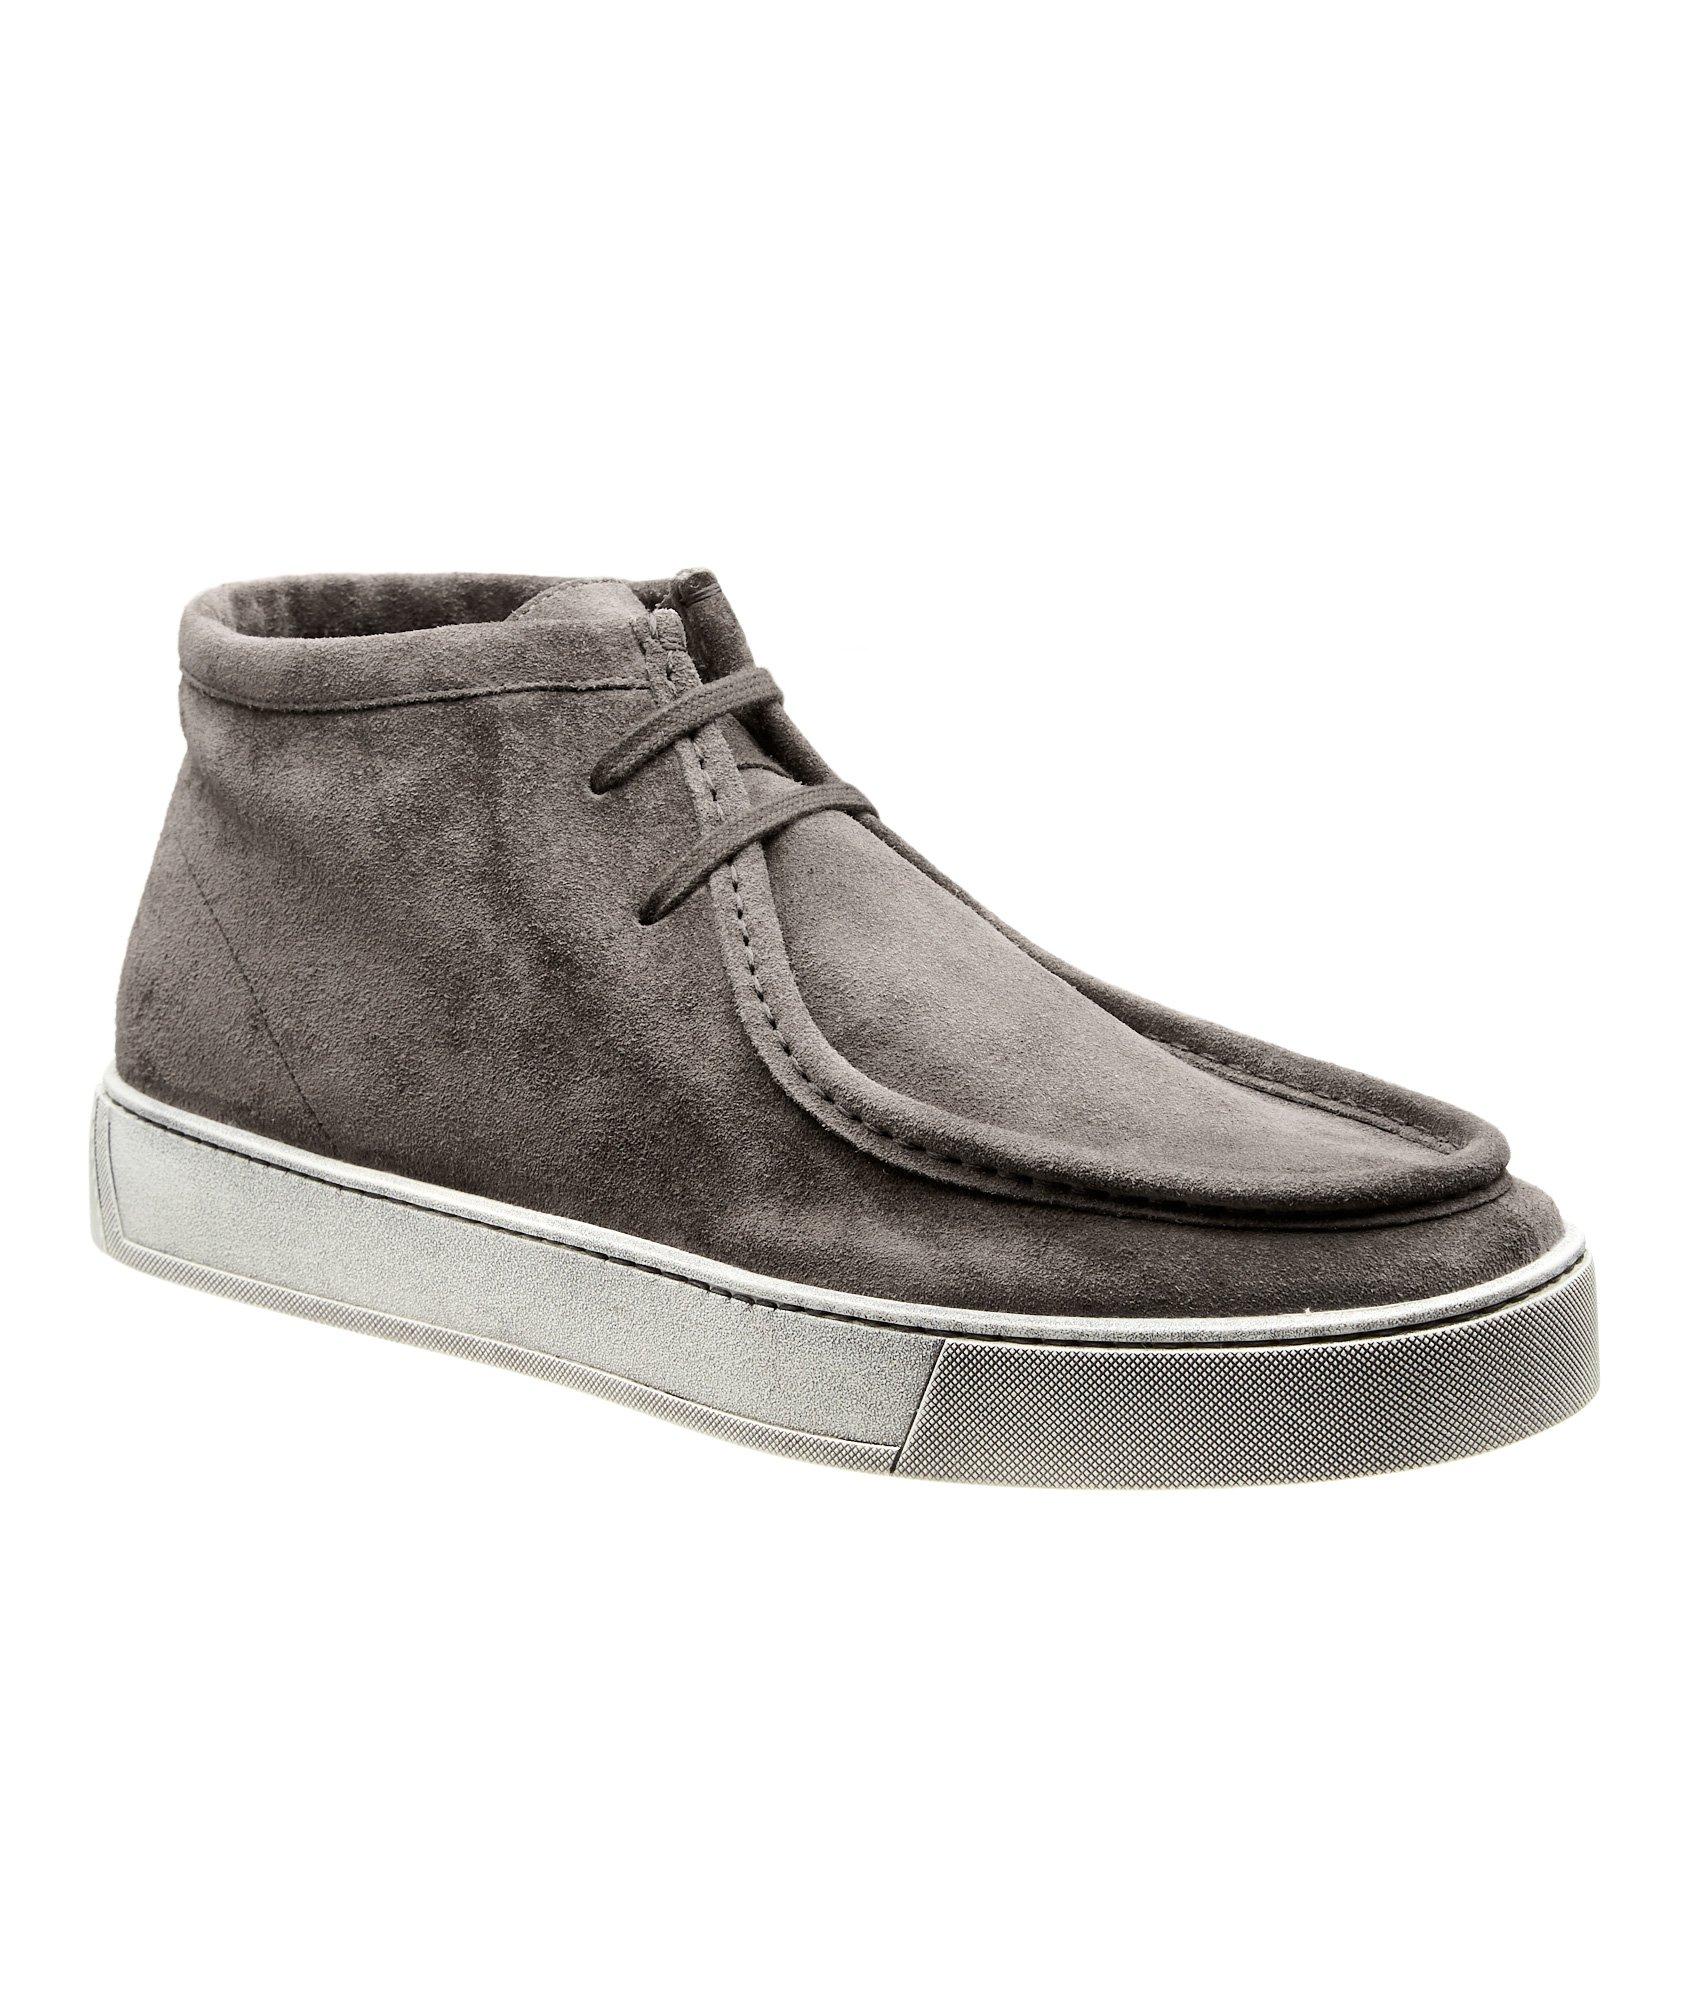 Fur Lined Suede Chukkas image 0